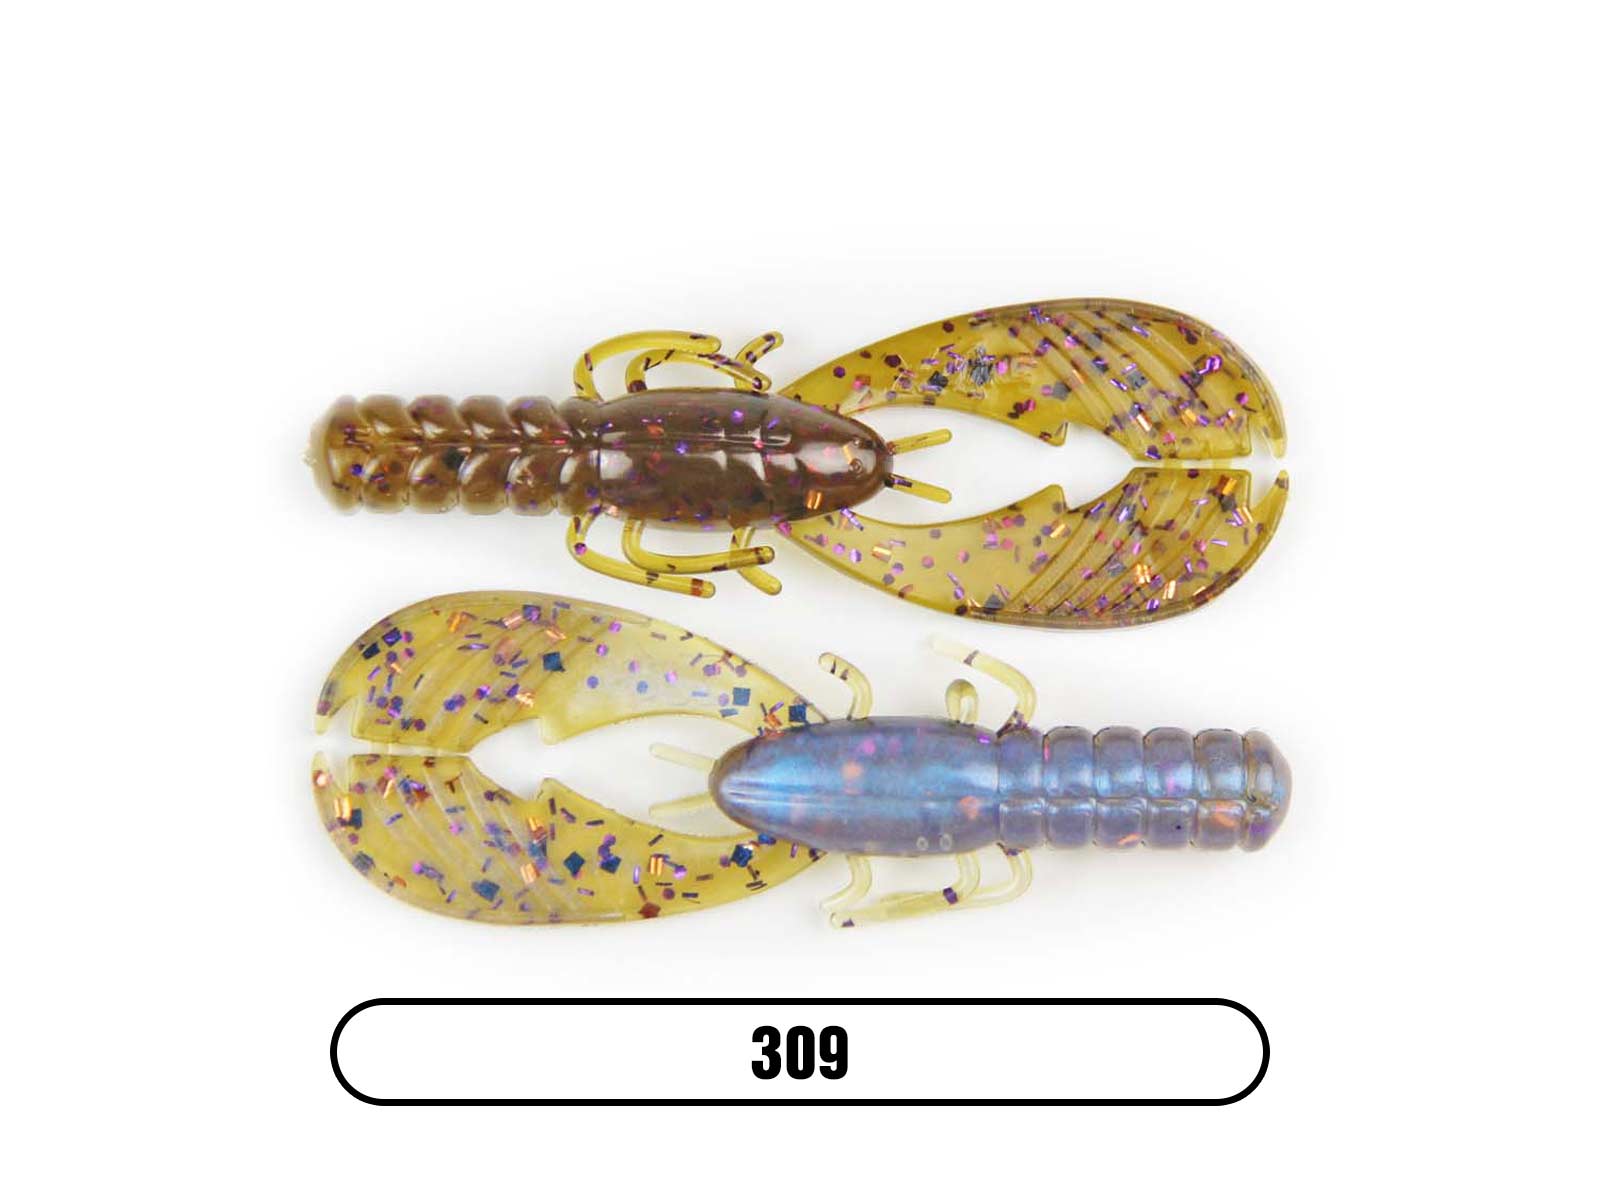 YUM All Freshwater Fishing Baits, Lures & Flies for sale